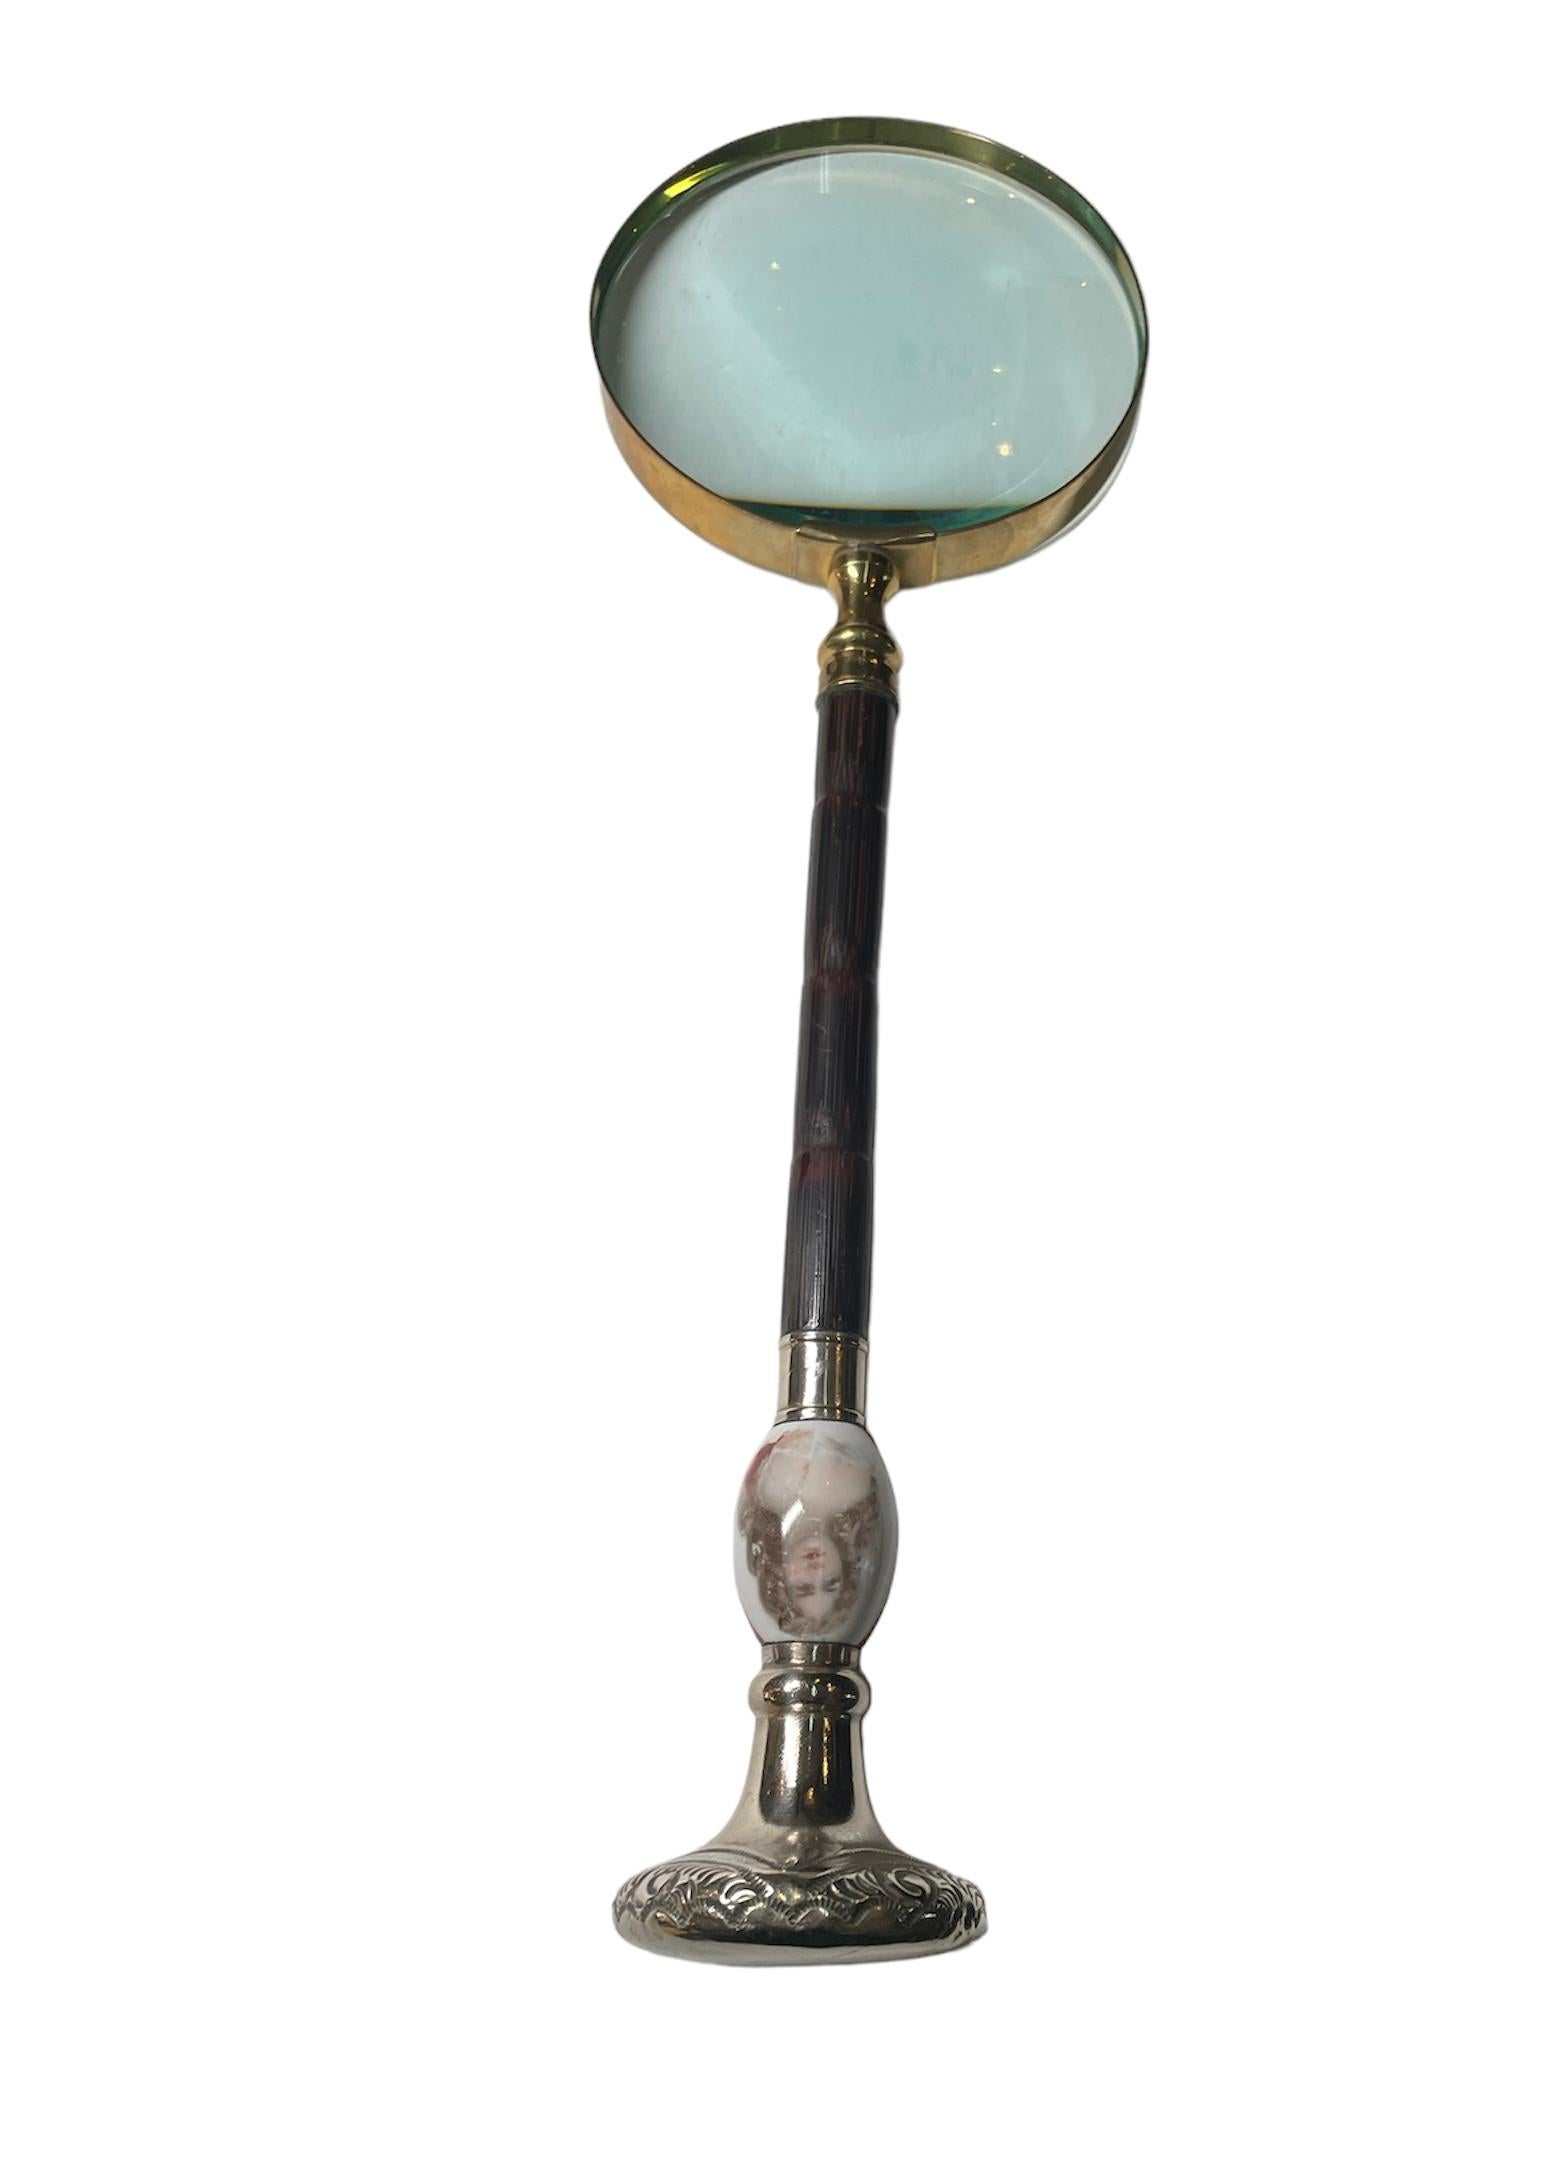 This is a round magnifying glass with long handle. The magnifying glass is enframed in gilt metal. The long handle is made of dark brown wood, but it is embellished by a hand painted portrait of a lady over an oval shaped porcelain piece. The back